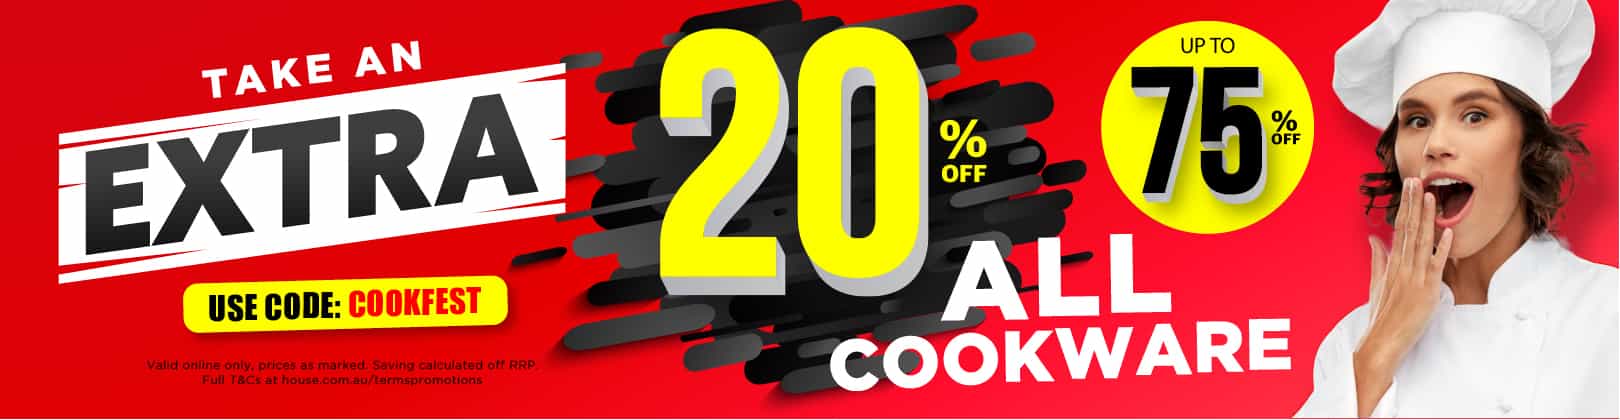 House up to 75% OFF + extra 20% OFF on all cookware with coupon. Save on Baccarat, Kambrook & more